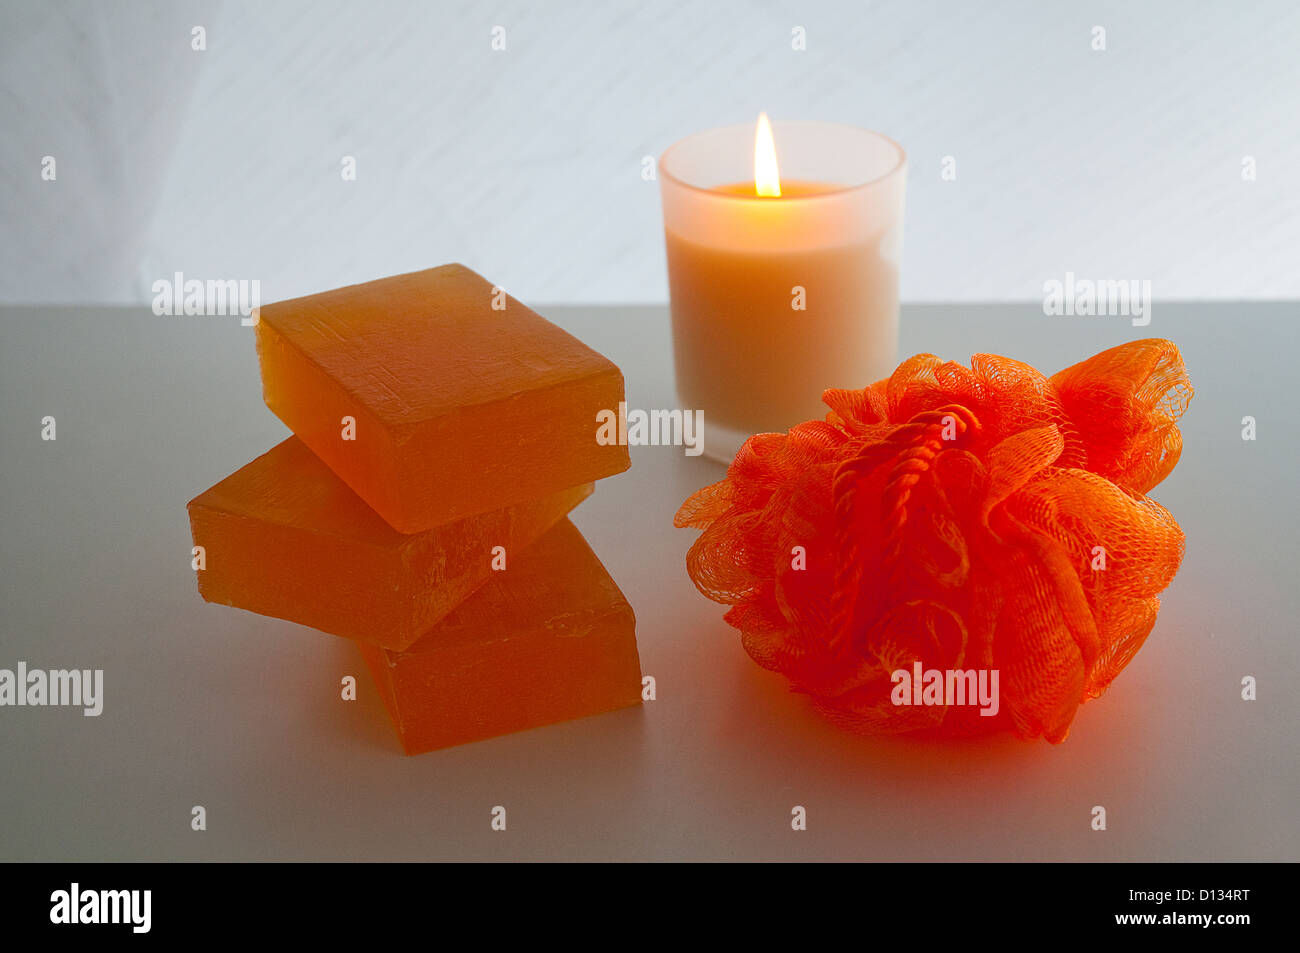 Soap, sponge and lit up candle. Stock Photo